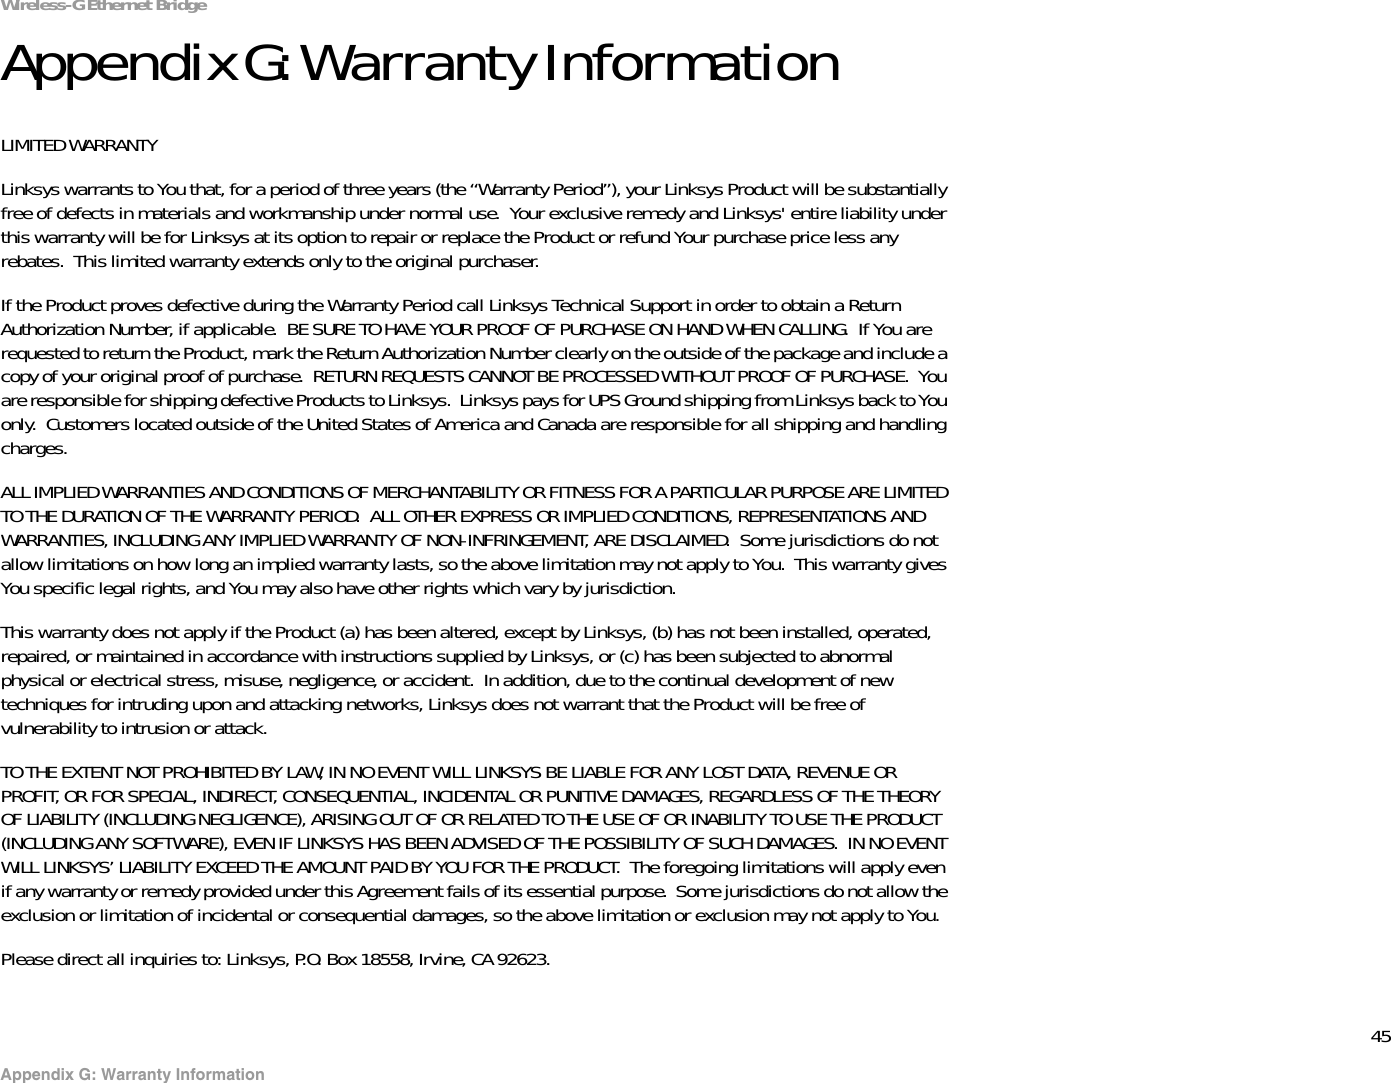 45Appendix G: Warranty InformationWireless-G Ethernet BridgeAppendix G: Warranty InformationLIMITED WARRANTYLinksys warrants to You that, for a period of three years (the “Warranty Period”), your Linksys Product will be substantially free of defects in materials and workmanship under normal use.  Your exclusive remedy and Linksys&apos; entire liability under this warranty will be for Linksys at its option to repair or replace the Product or refund Your purchase price less any rebates.  This limited warranty extends only to the original purchaser.  If the Product proves defective during the Warranty Period call Linksys Technical Support in order to obtain a Return Authorization Number, if applicable.  BE SURE TO HAVE YOUR PROOF OF PURCHASE ON HAND WHEN CALLING.  If You are requested to return the Product, mark the Return Authorization Number clearly on the outside of the package and include a copy of your original proof of purchase.  RETURN REQUESTS CANNOT BE PROCESSED WITHOUT PROOF OF PURCHASE.  You are responsible for shipping defective Products to Linksys.  Linksys pays for UPS Ground shipping from Linksys back to You only.  Customers located outside of the United States of America and Canada are responsible for all shipping and handling charges. ALL IMPLIED WARRANTIES AND CONDITIONS OF MERCHANTABILITY OR FITNESS FOR A PARTICULAR PURPOSE ARE LIMITED TO THE DURATION OF THE WARRANTY PERIOD.  ALL OTHER EXPRESS OR IMPLIED CONDITIONS, REPRESENTATIONS AND WARRANTIES, INCLUDING ANY IMPLIED WARRANTY OF NON-INFRINGEMENT, ARE DISCLAIMED.  Some jurisdictions do not allow limitations on how long an implied warranty lasts, so the above limitation may not apply to You.  This warranty gives You specific legal rights, and You may also have other rights which vary by jurisdiction.This warranty does not apply if the Product (a) has been altered, except by Linksys, (b) has not been installed, operated, repaired, or maintained in accordance with instructions supplied by Linksys, or (c) has been subjected to abnormal physical or electrical stress, misuse, negligence, or accident.  In addition, due to the continual development of new techniques for intruding upon and attacking networks, Linksys does not warrant that the Product will be free of vulnerability to intrusion or attack.TO THE EXTENT NOT PROHIBITED BY LAW, IN NO EVENT WILL LINKSYS BE LIABLE FOR ANY LOST DATA, REVENUE OR PROFIT, OR FOR SPECIAL, INDIRECT, CONSEQUENTIAL, INCIDENTAL OR PUNITIVE DAMAGES, REGARDLESS OF THE THEORY OF LIABILITY (INCLUDING NEGLIGENCE), ARISING OUT OF OR RELATED TO THE USE OF OR INABILITY TO USE THE PRODUCT (INCLUDING ANY SOFTWARE), EVEN IF LINKSYS HAS BEEN ADVISED OF THE POSSIBILITY OF SUCH DAMAGES.  IN NO EVENT WILL LINKSYS’ LIABILITY EXCEED THE AMOUNT PAID BY YOU FOR THE PRODUCT.  The foregoing limitations will apply even if any warranty or remedy provided under this Agreement fails of its essential purpose.  Some jurisdictions do not allow the exclusion or limitation of incidental or consequential damages, so the above limitation or exclusion may not apply to You.Please direct all inquiries to: Linksys, P.O. Box 18558, Irvine, CA 92623.